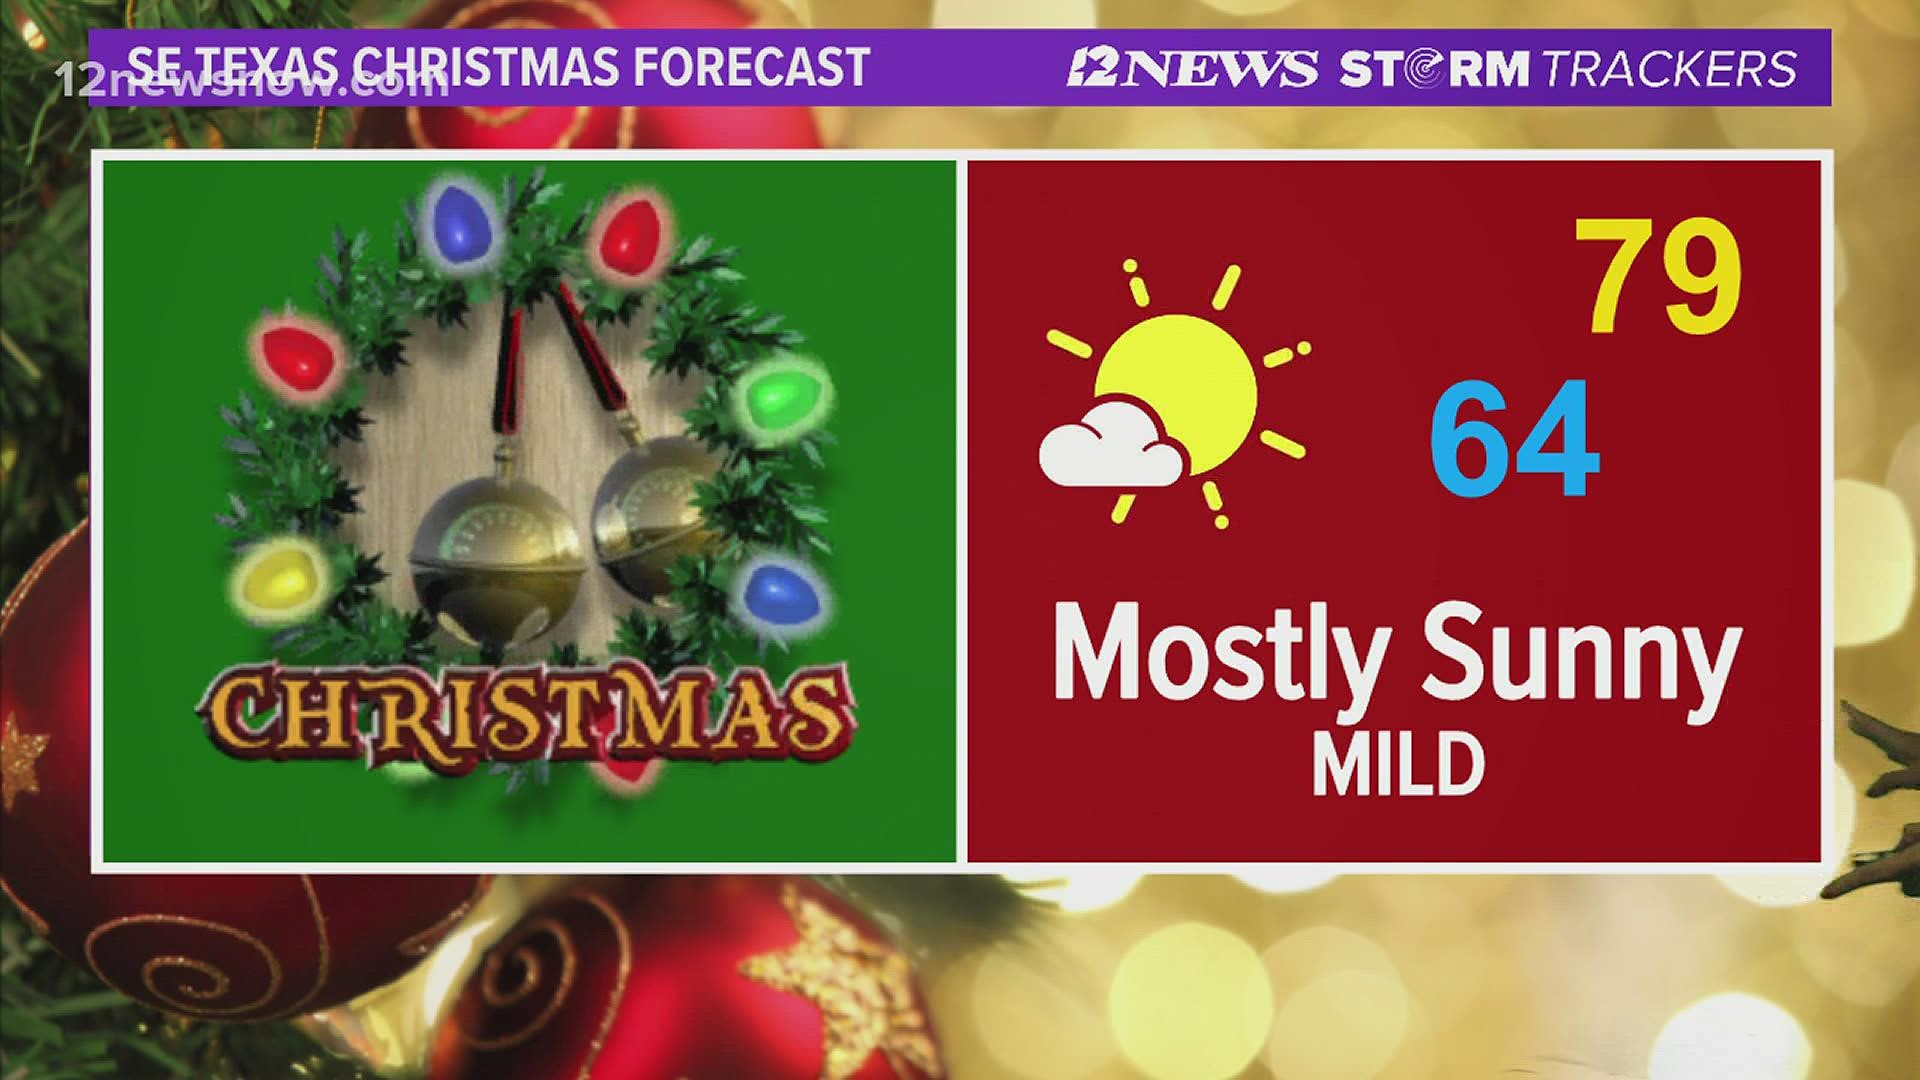 Chilly and Soggy Monday forecast. Warmer middle of the week into Christmas